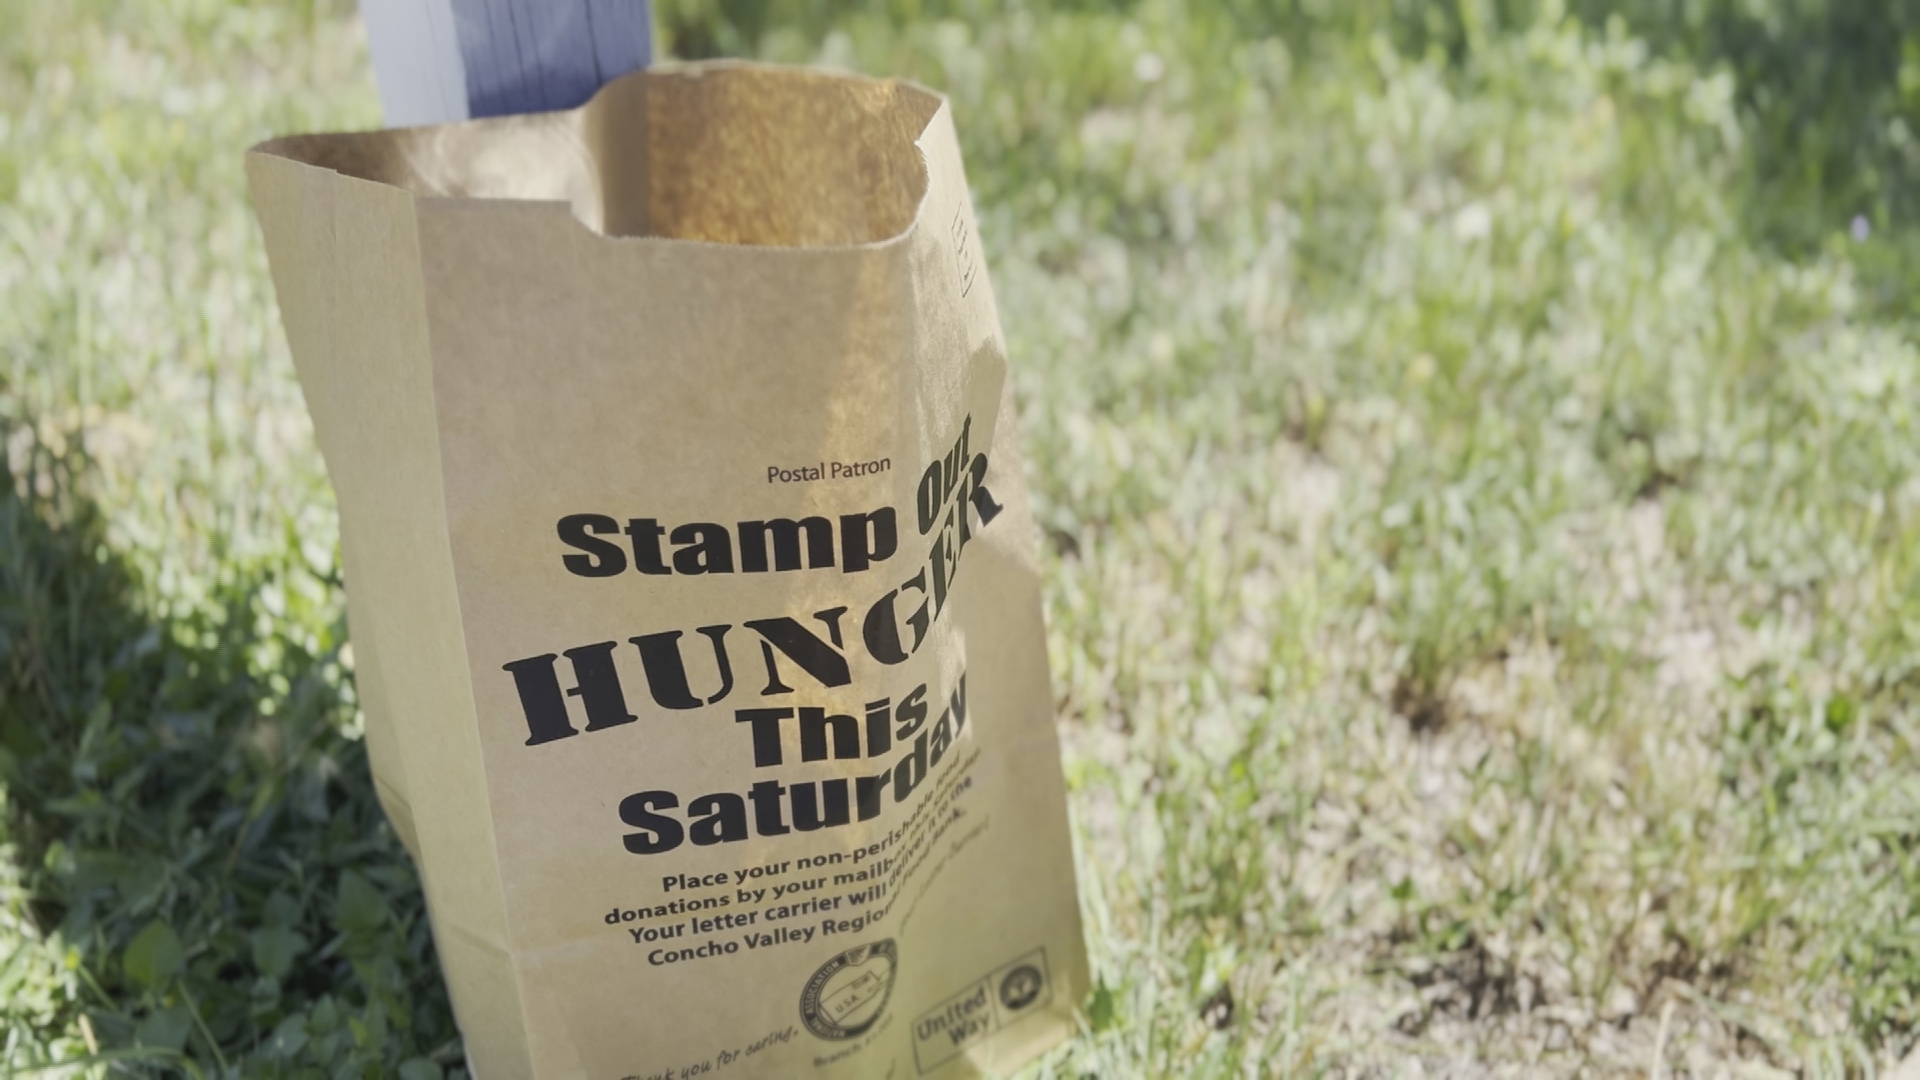 Aside from the Stamp Out Hunger food drive, there are several other ways you can support local food banks.